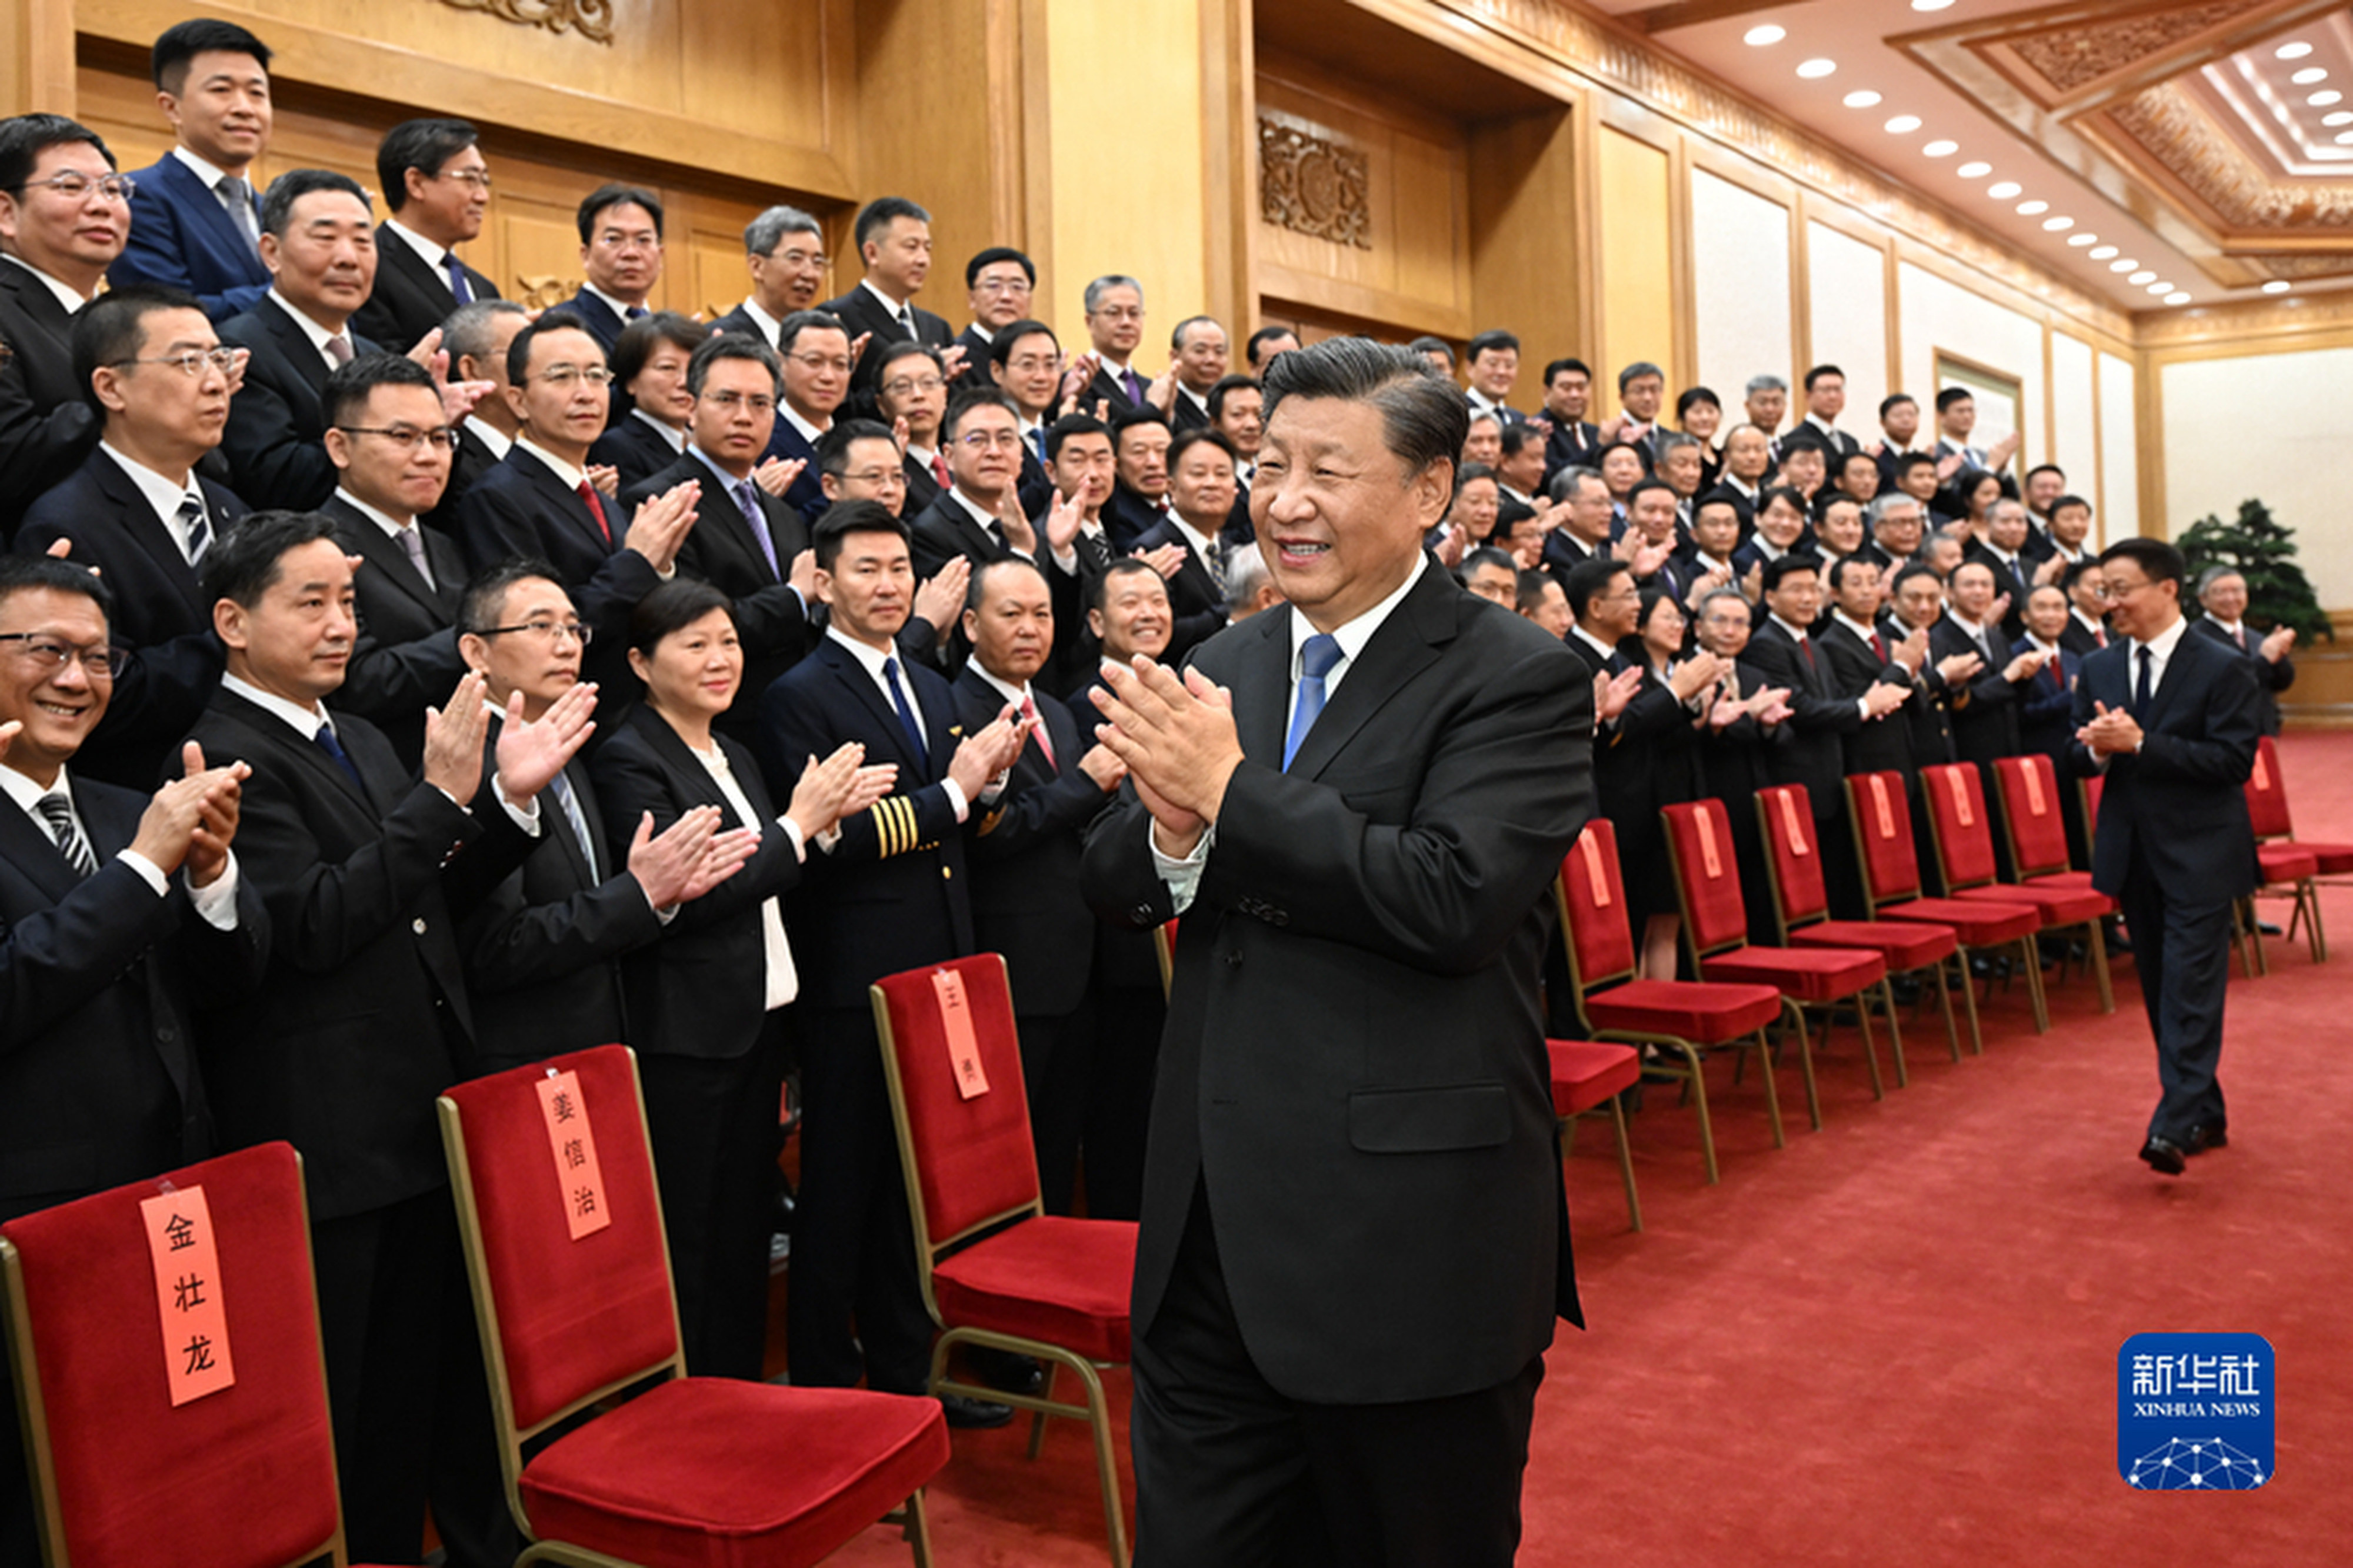 President Xi Jinping met with a C919 delegation on Friday in Beijing ahead of China’s National Day on Saturday and 20th party congress in mid-October.  Photo: Xinhua